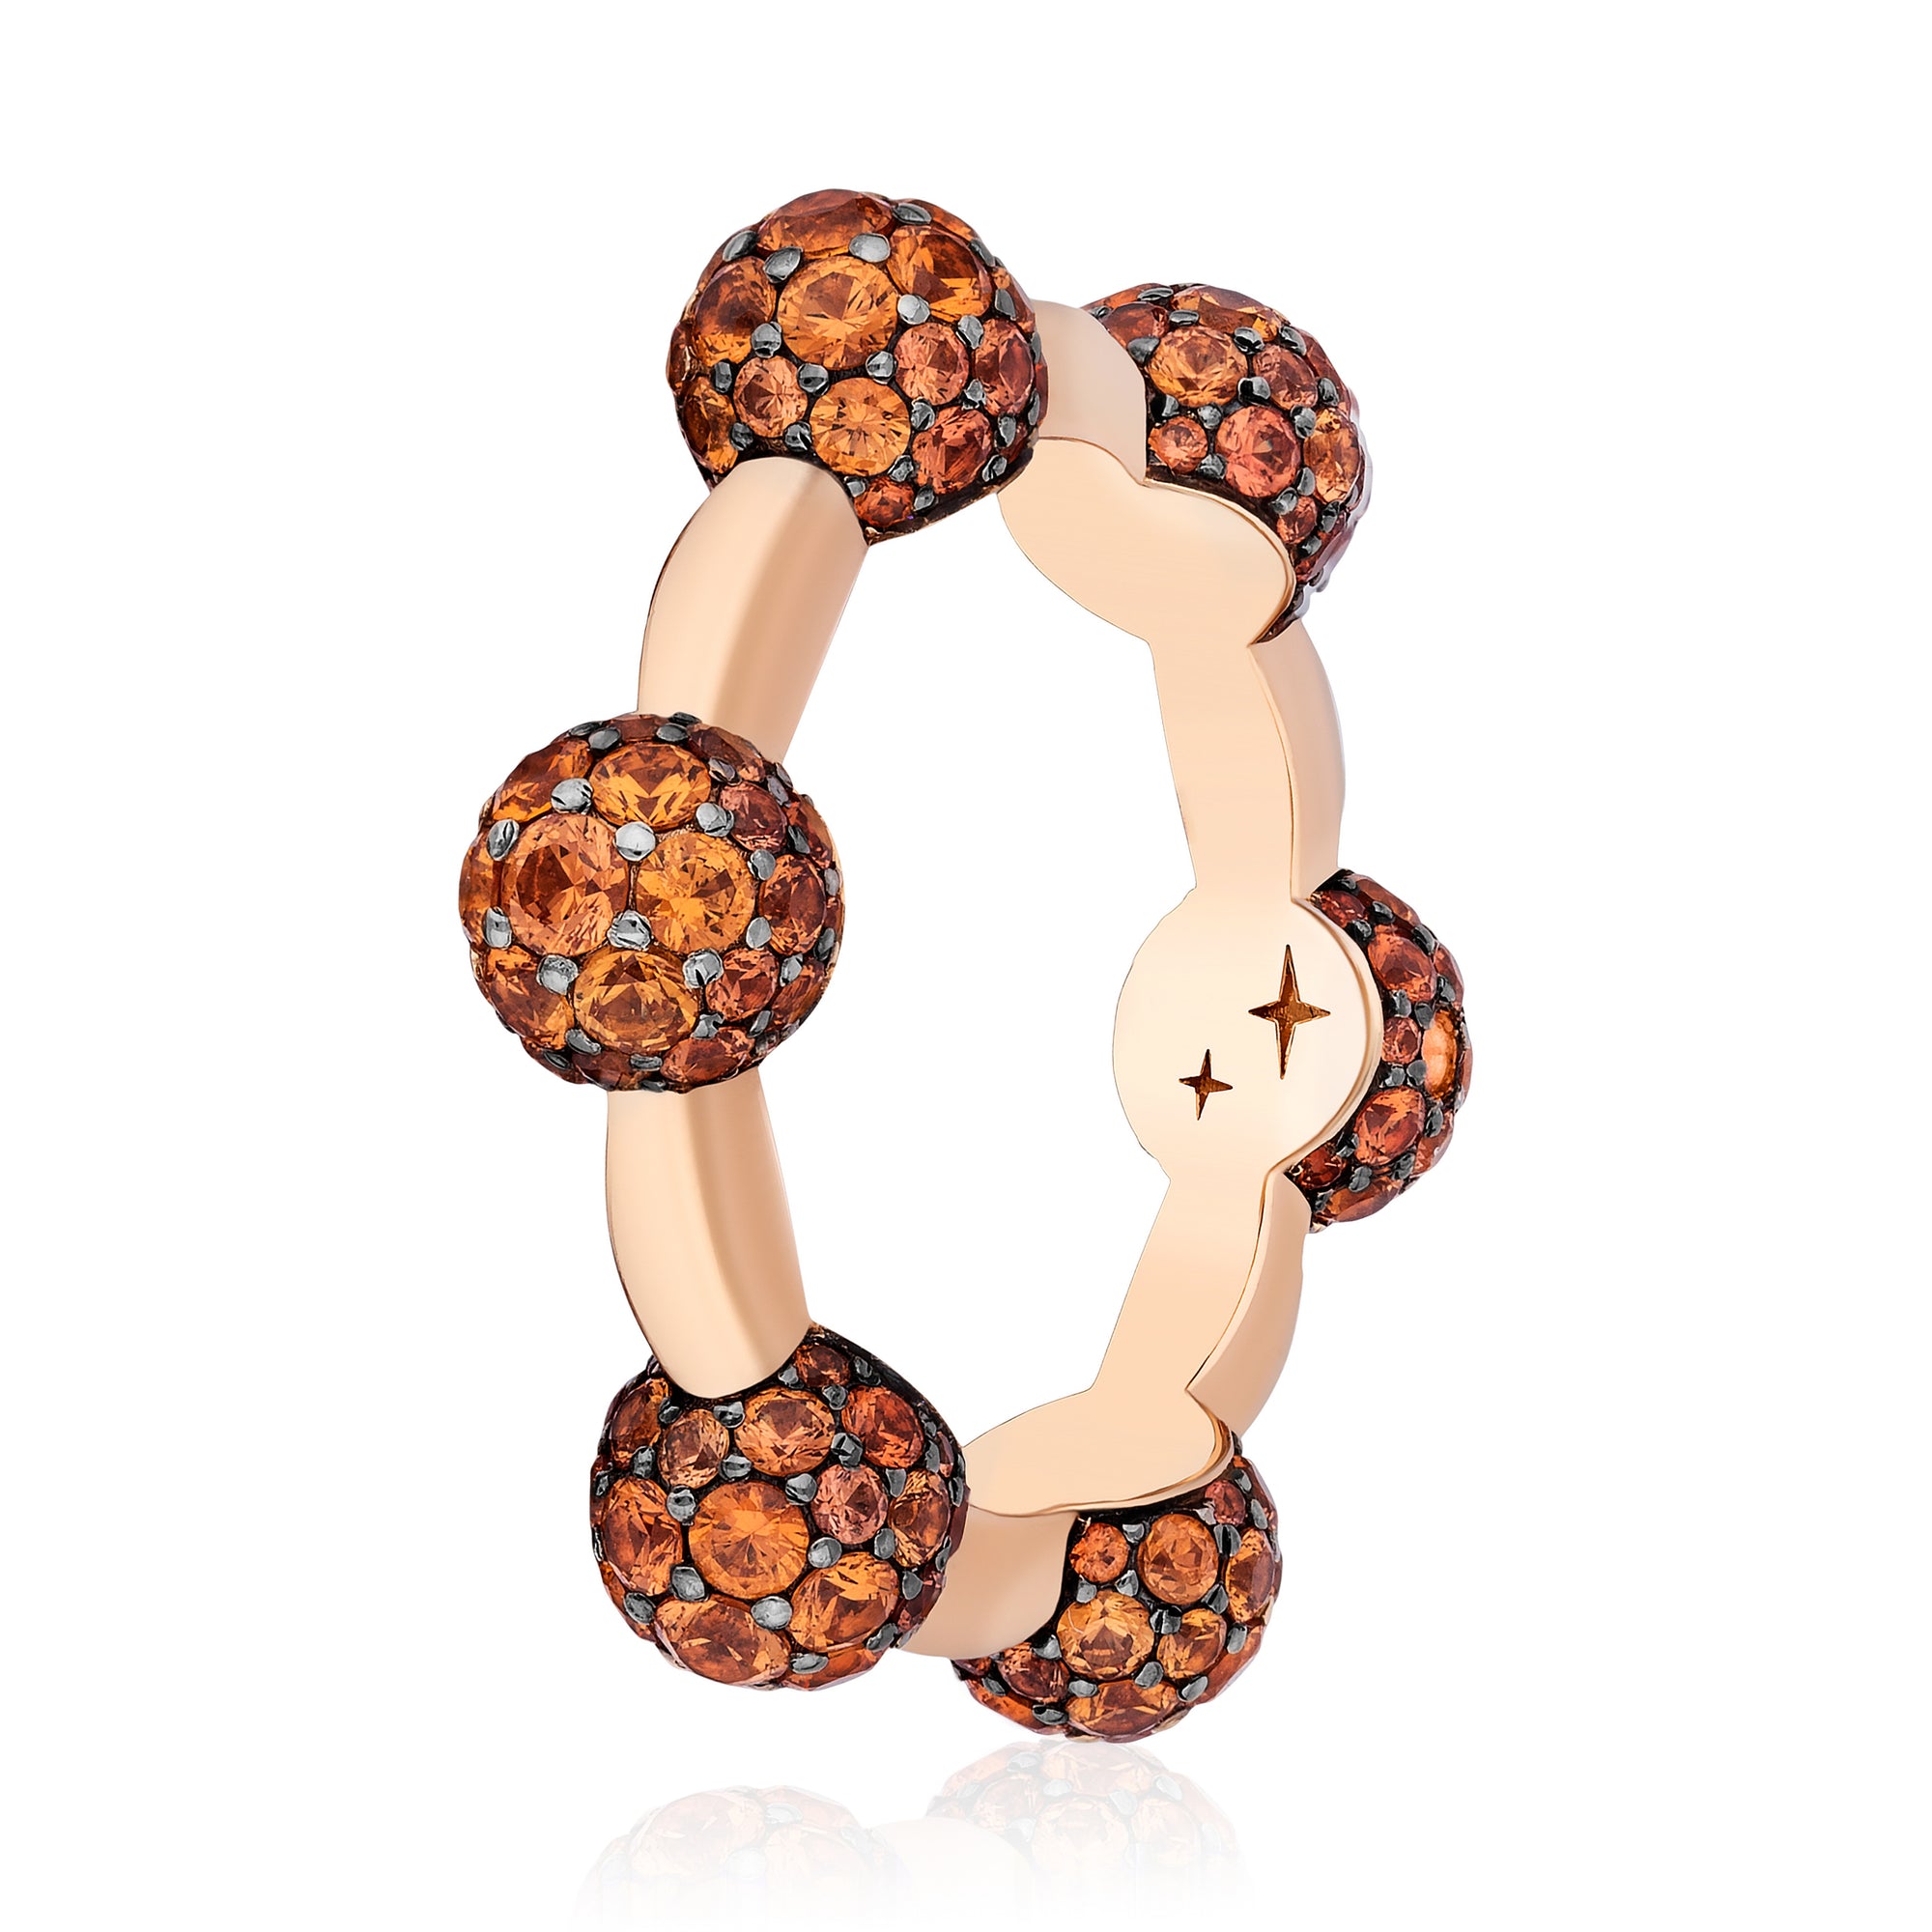 Celestial Ring in Rose Gold with Orange Sapphires